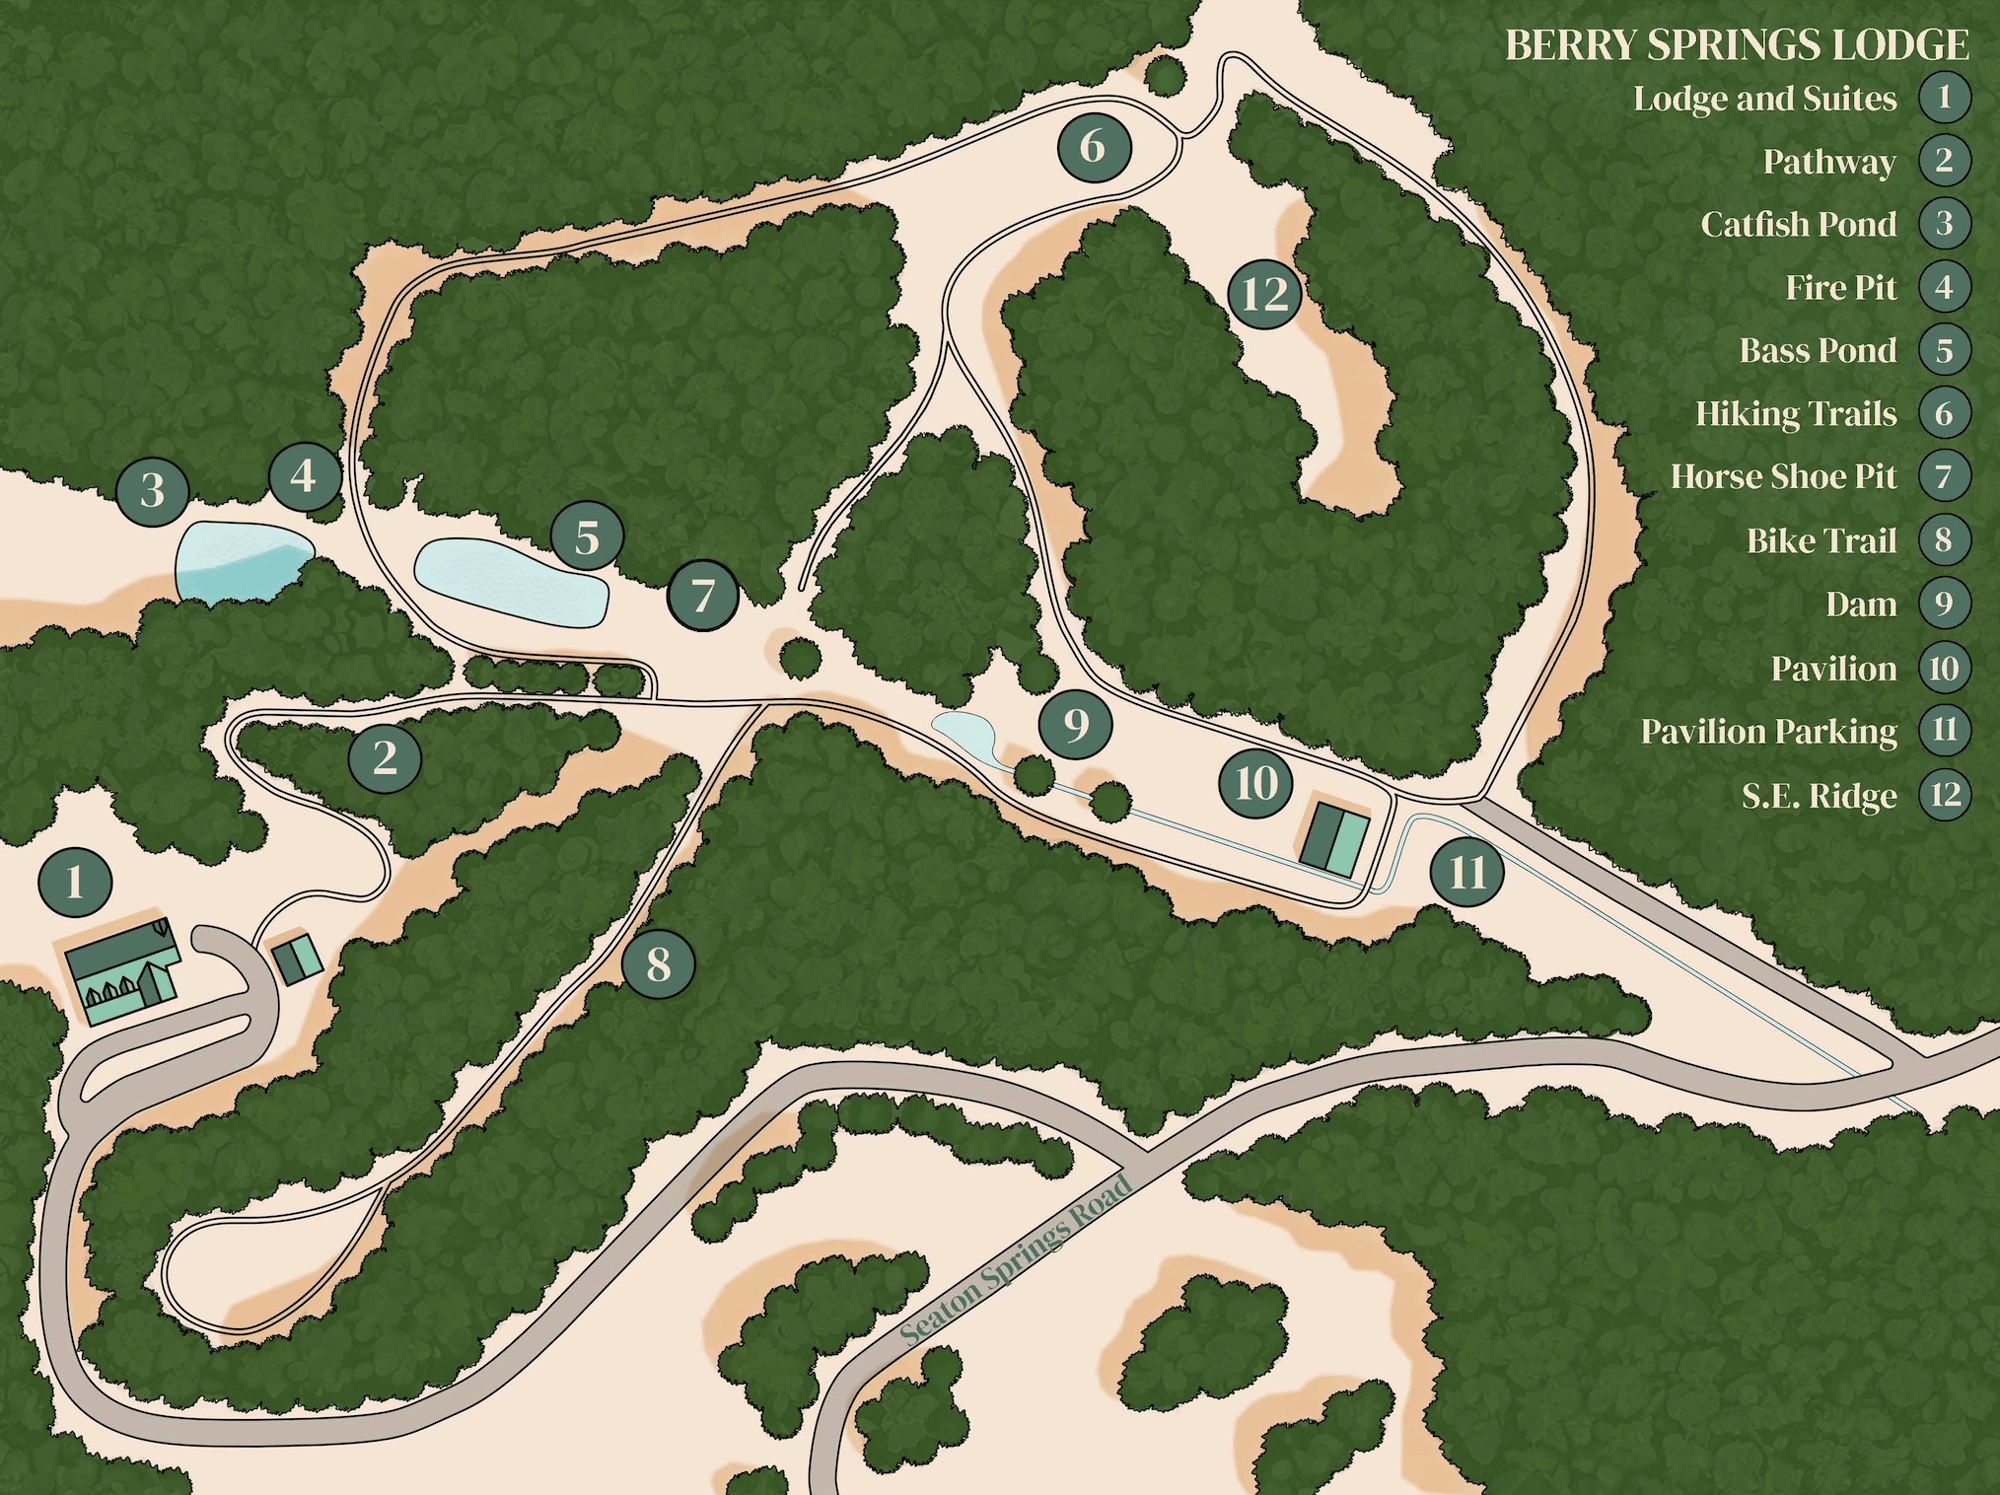 Berry Springs Lodge Site Map